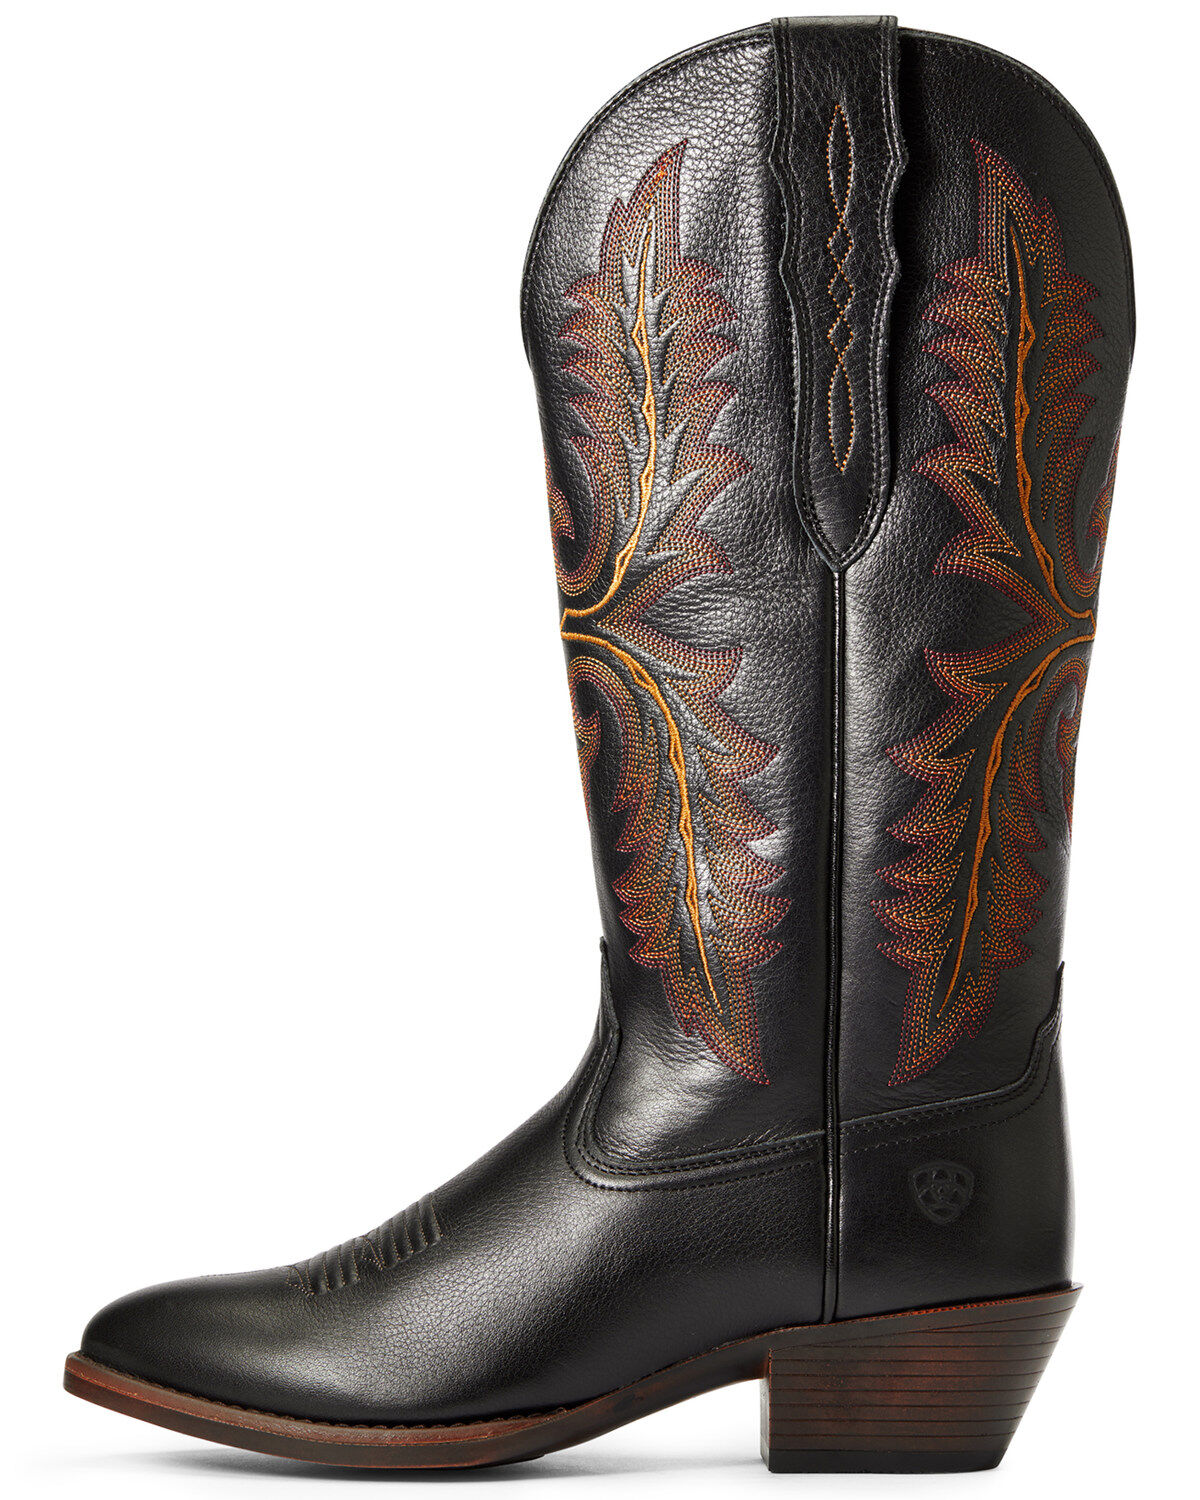 Details about   Ariat Women's Dark Tan Heritage Elastic Calf Cowgirl Boots 